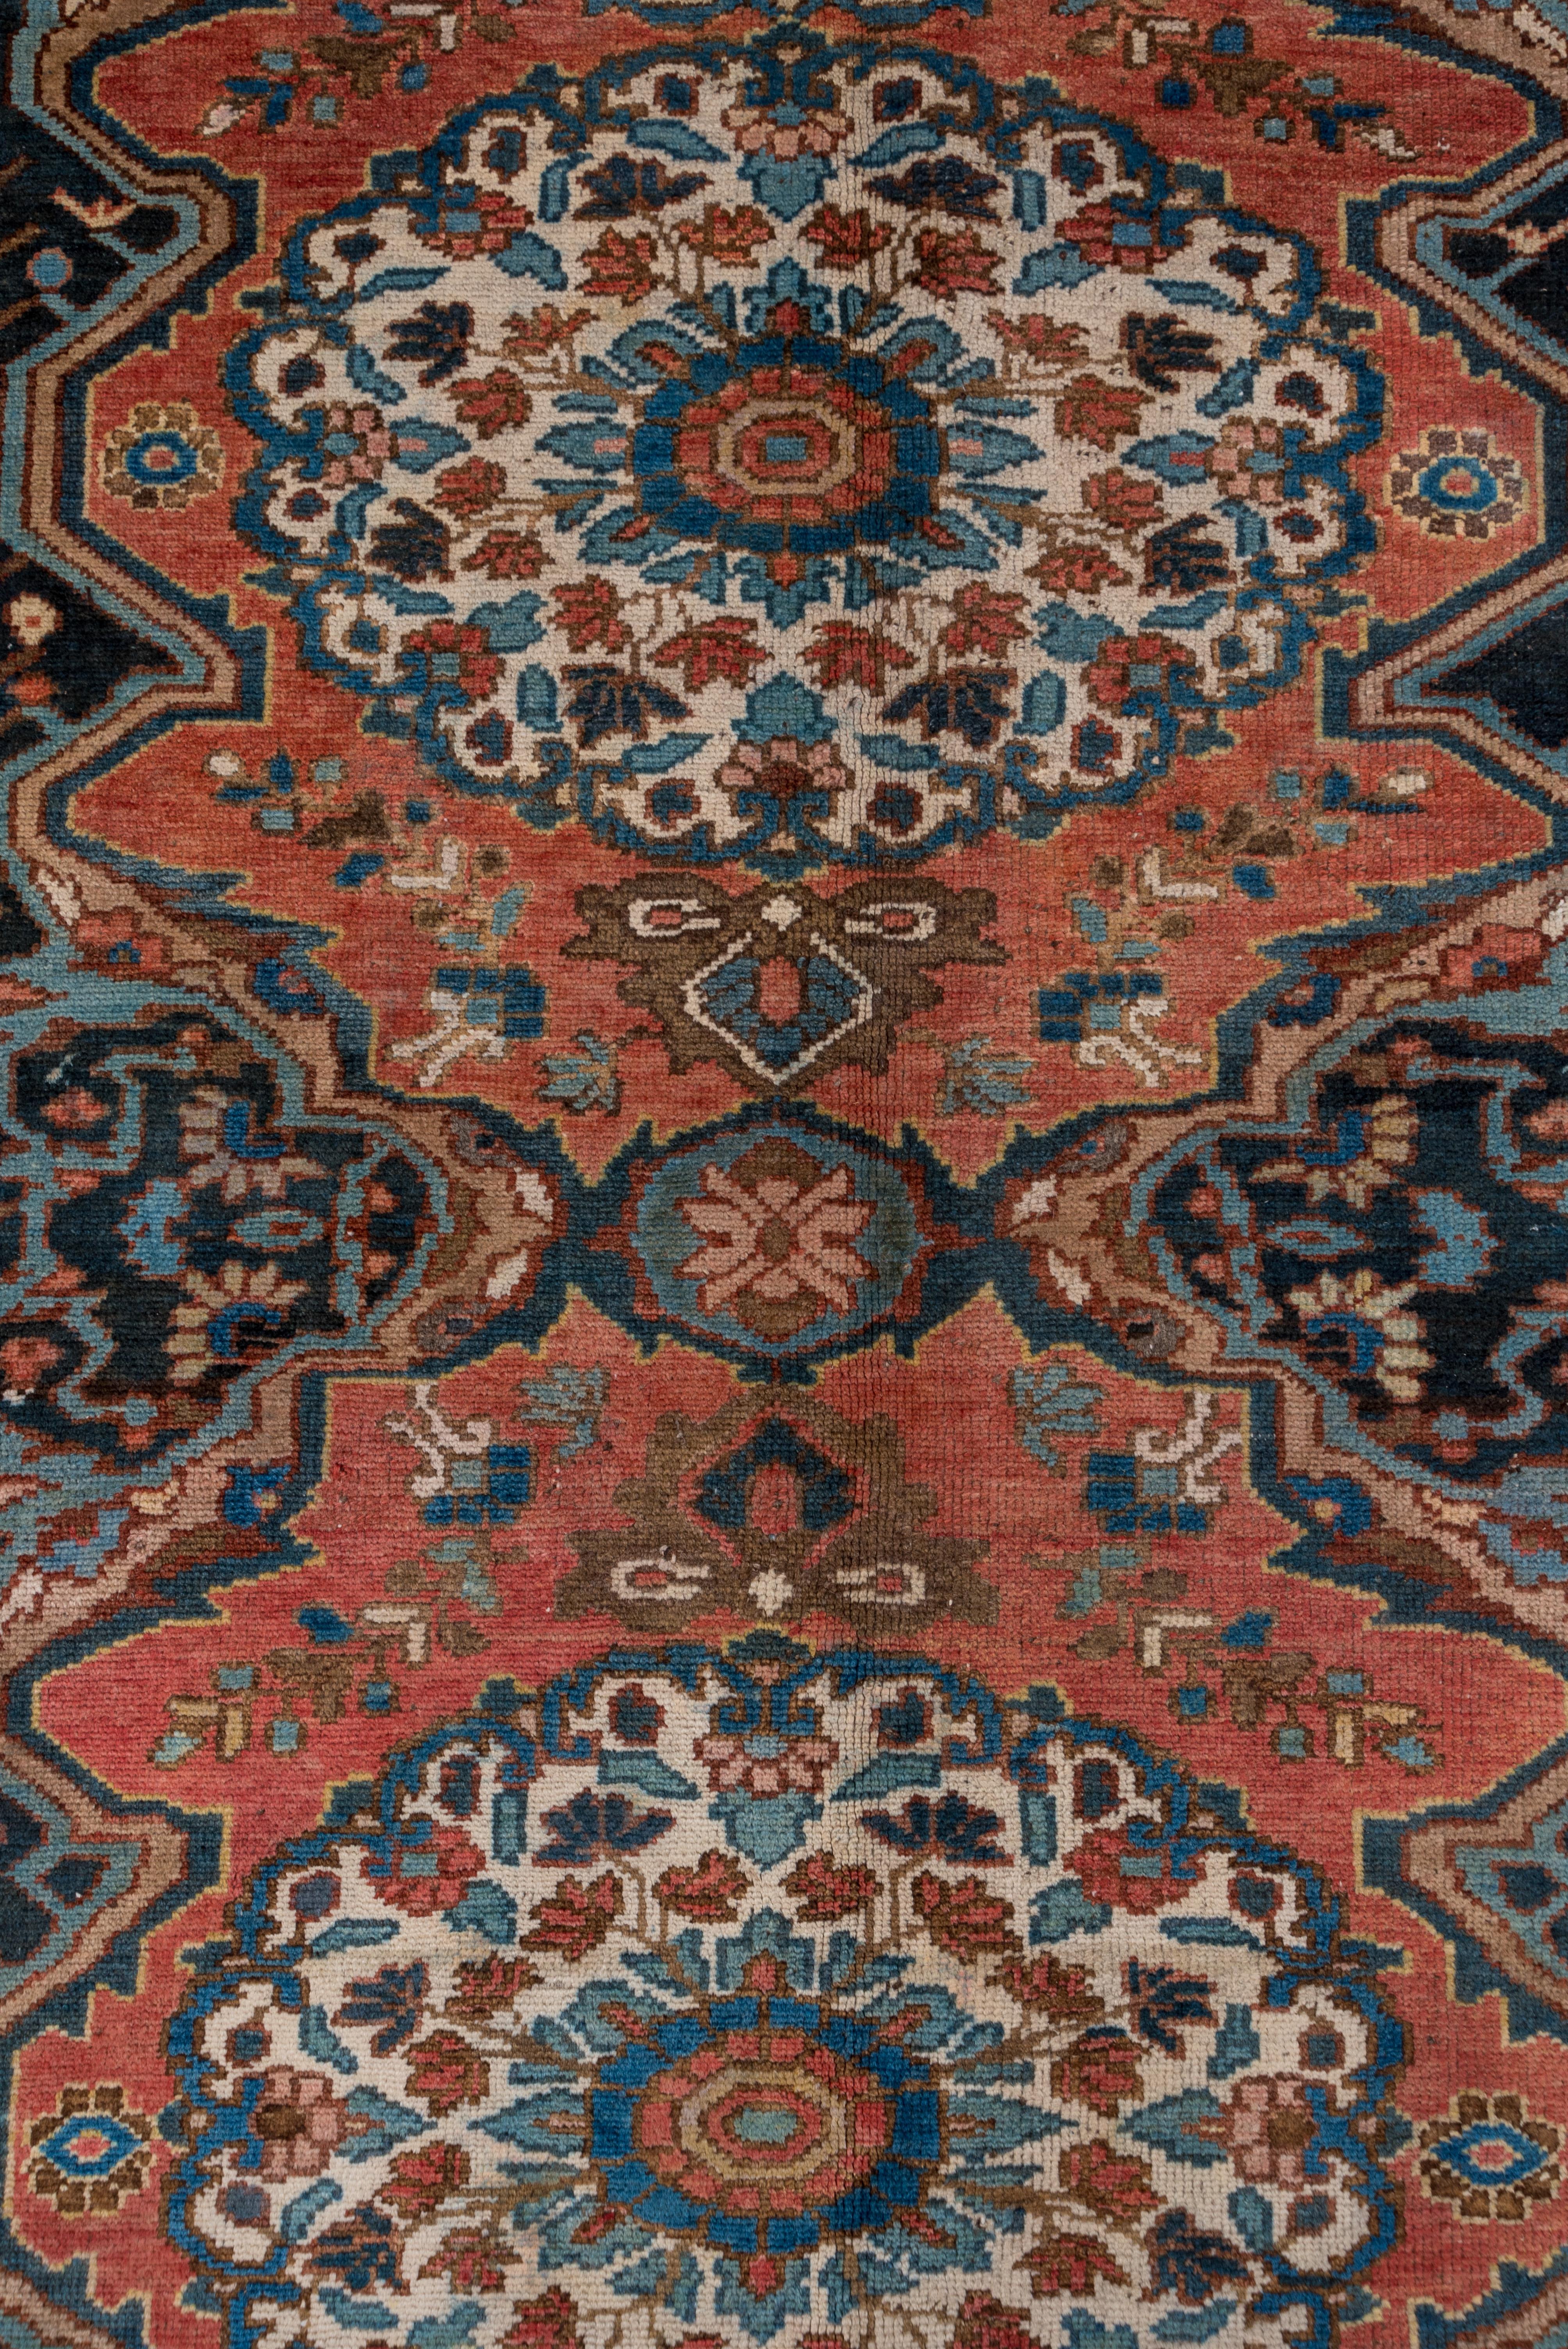 Wool Antique Rustic Persian Bakhtiary Gallery Carpet, Rose and Blue Field For Sale